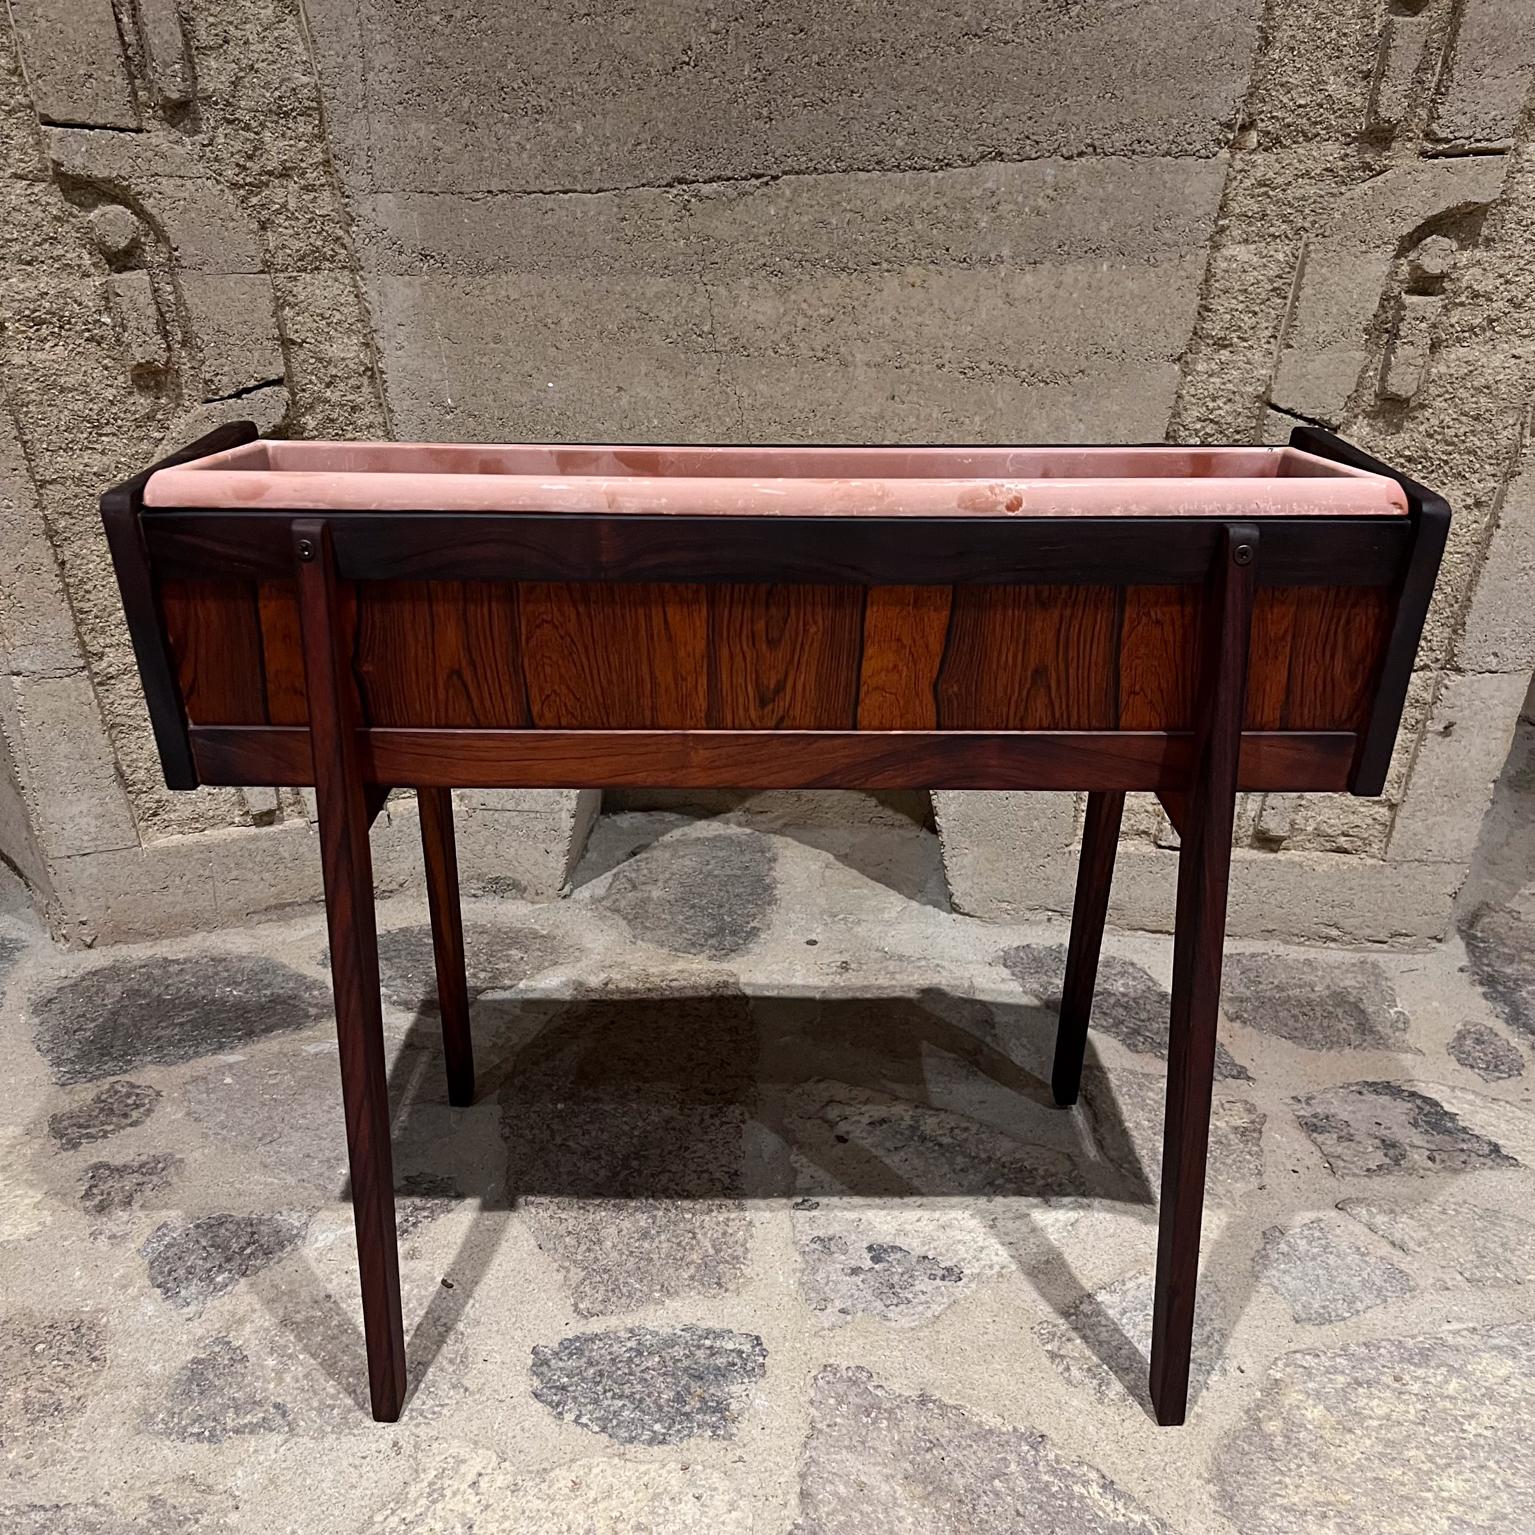 1960s Scandinavian Modern Leggy Planter Box Brazilian Rosewood
Made in Denmark style of Aksel Kjersgaard for Feldballes Møbelfabrik.
20 h x 25 w x 12.5 d
Original unrestored stable vintage condition. Minor fading.
Refer to images.
We ship to